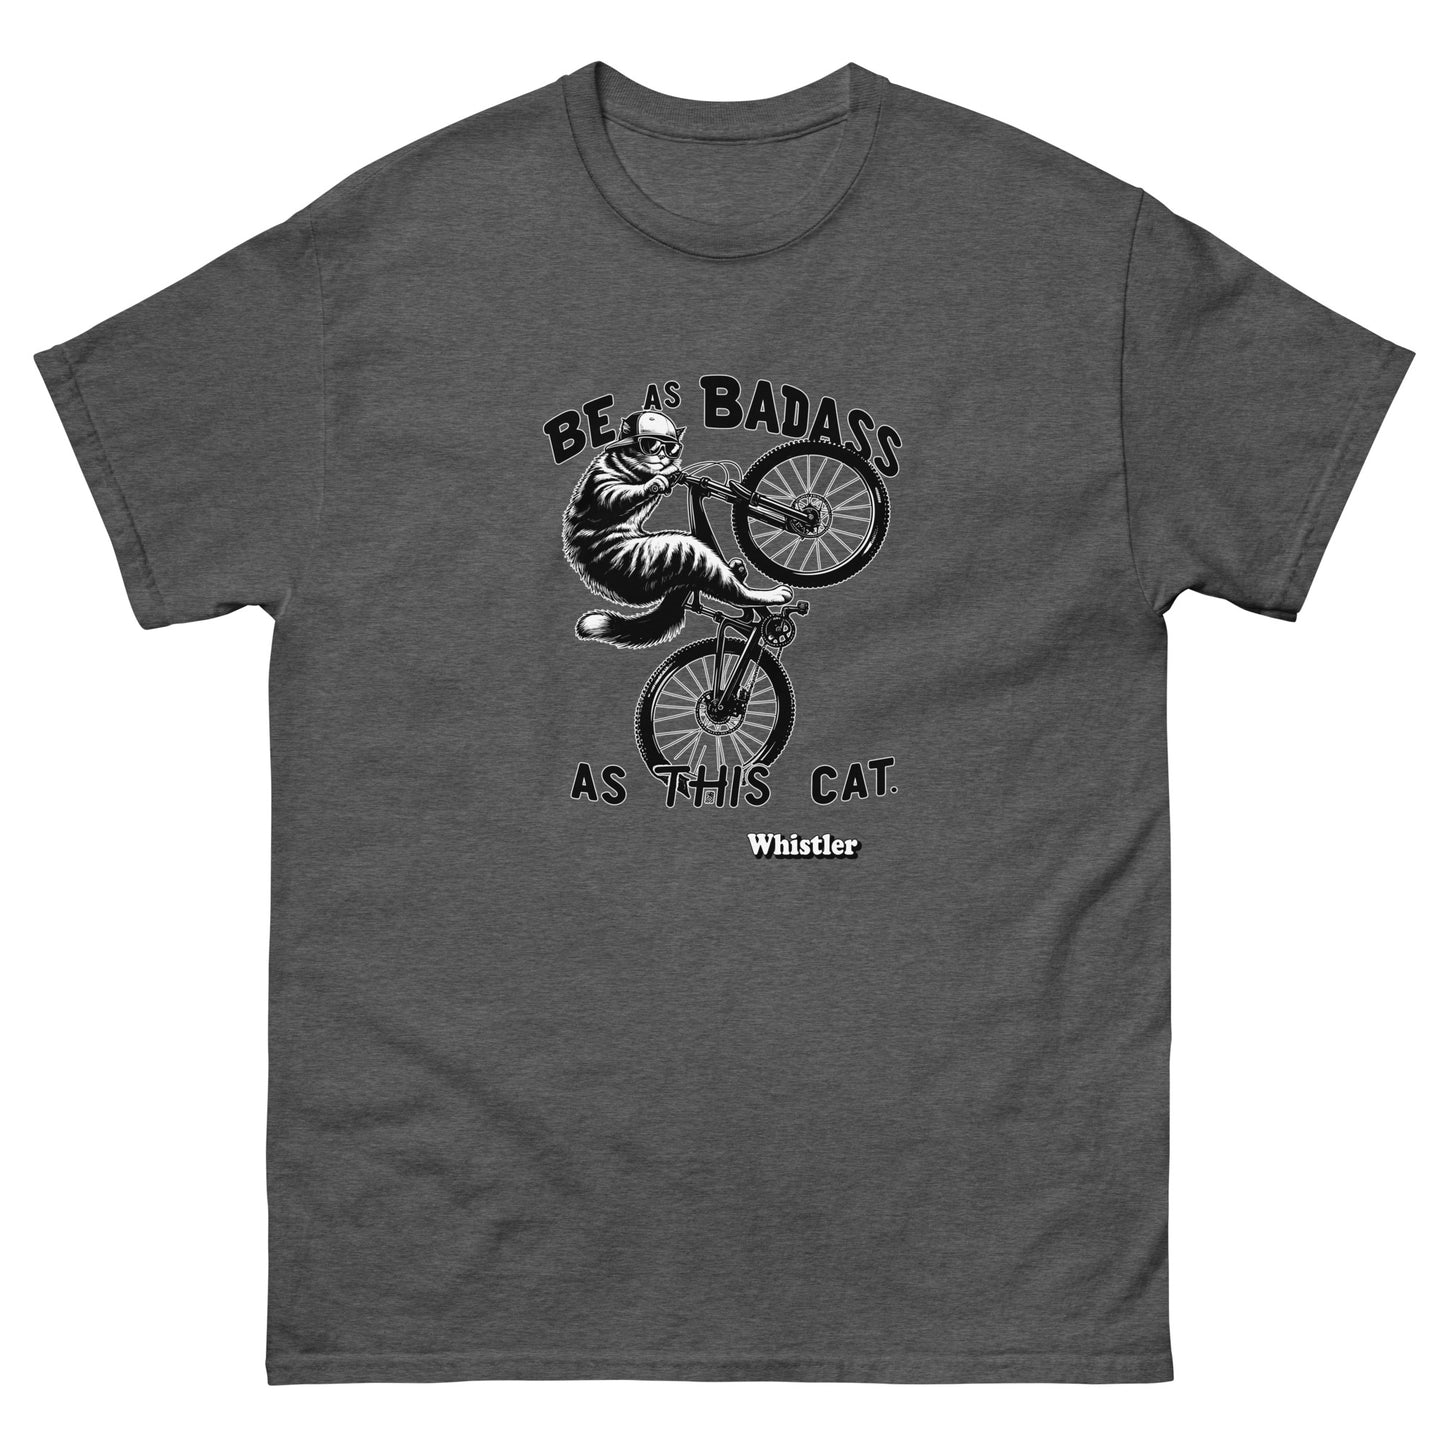 Be as badass as this cat whistler cat riding a bike design printed on a t-shirt by Whistler Shirts